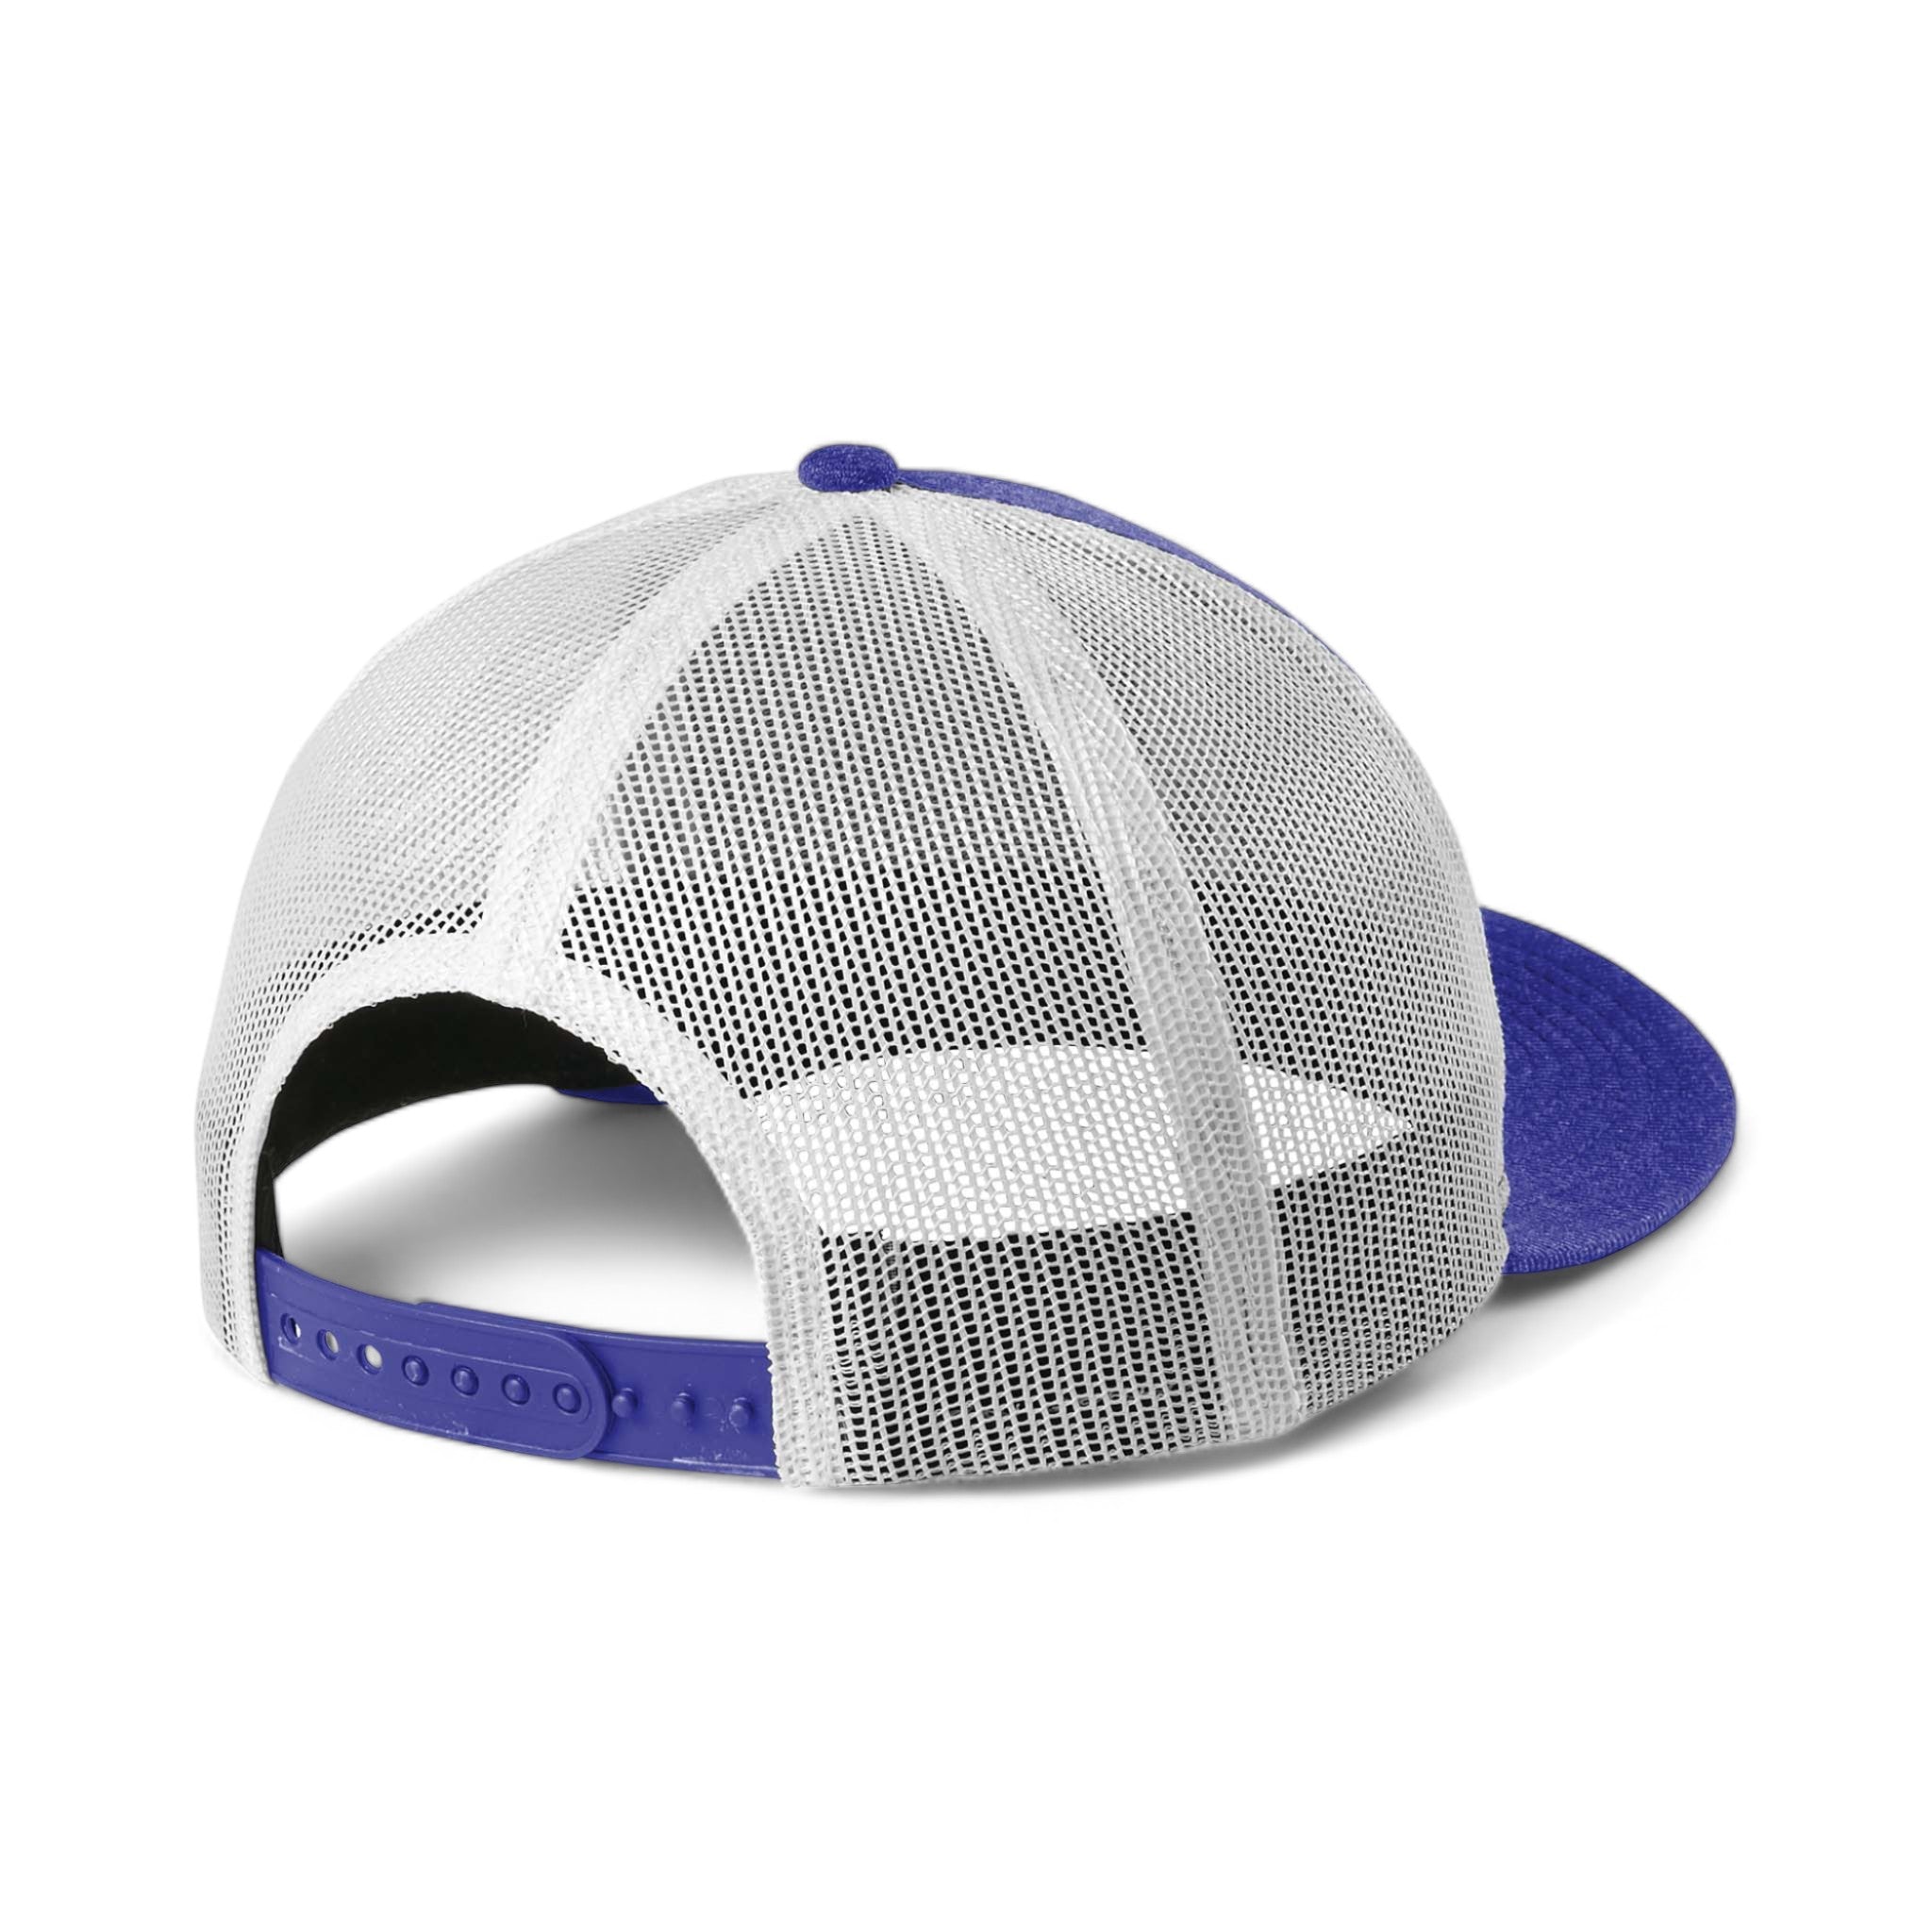 Back view of New Era NE207 custom hat in heather royal and white